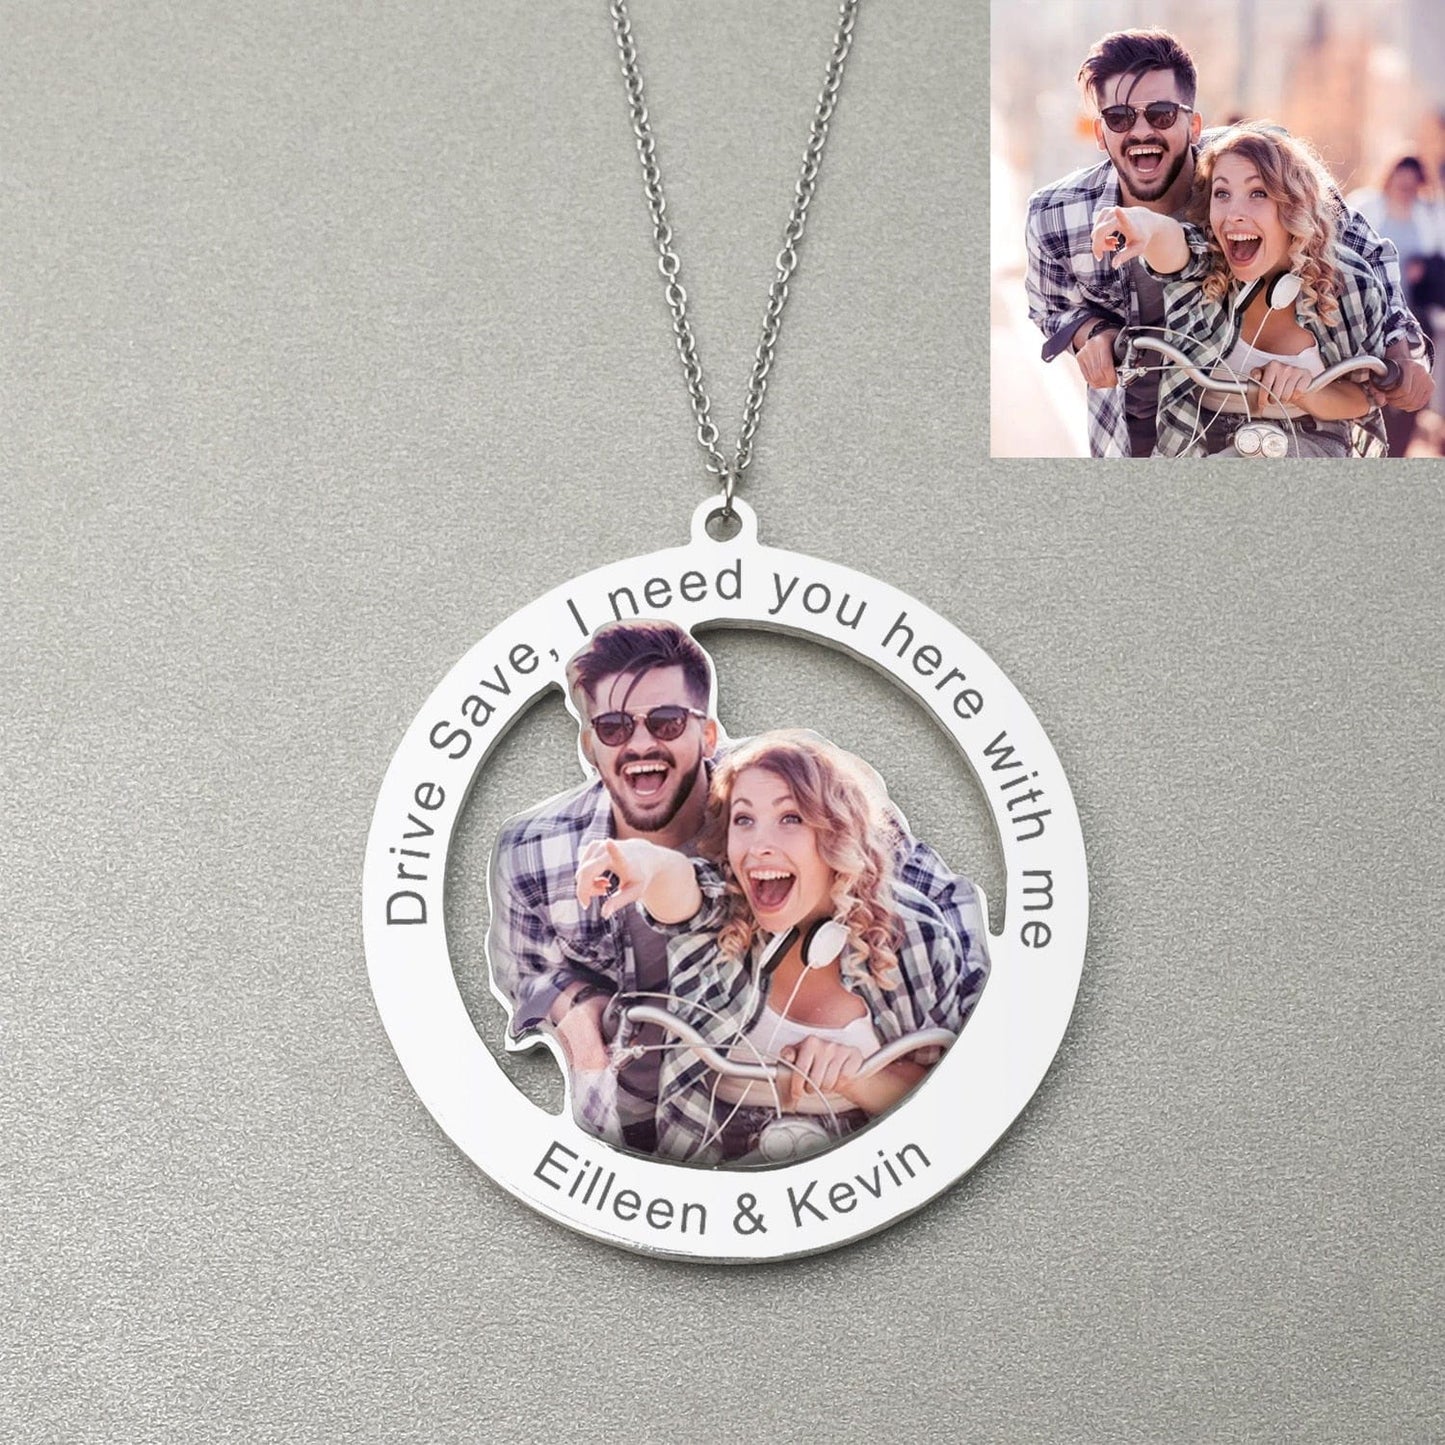 Personalized Hanging Car Ornament With Engraved Photo Charm